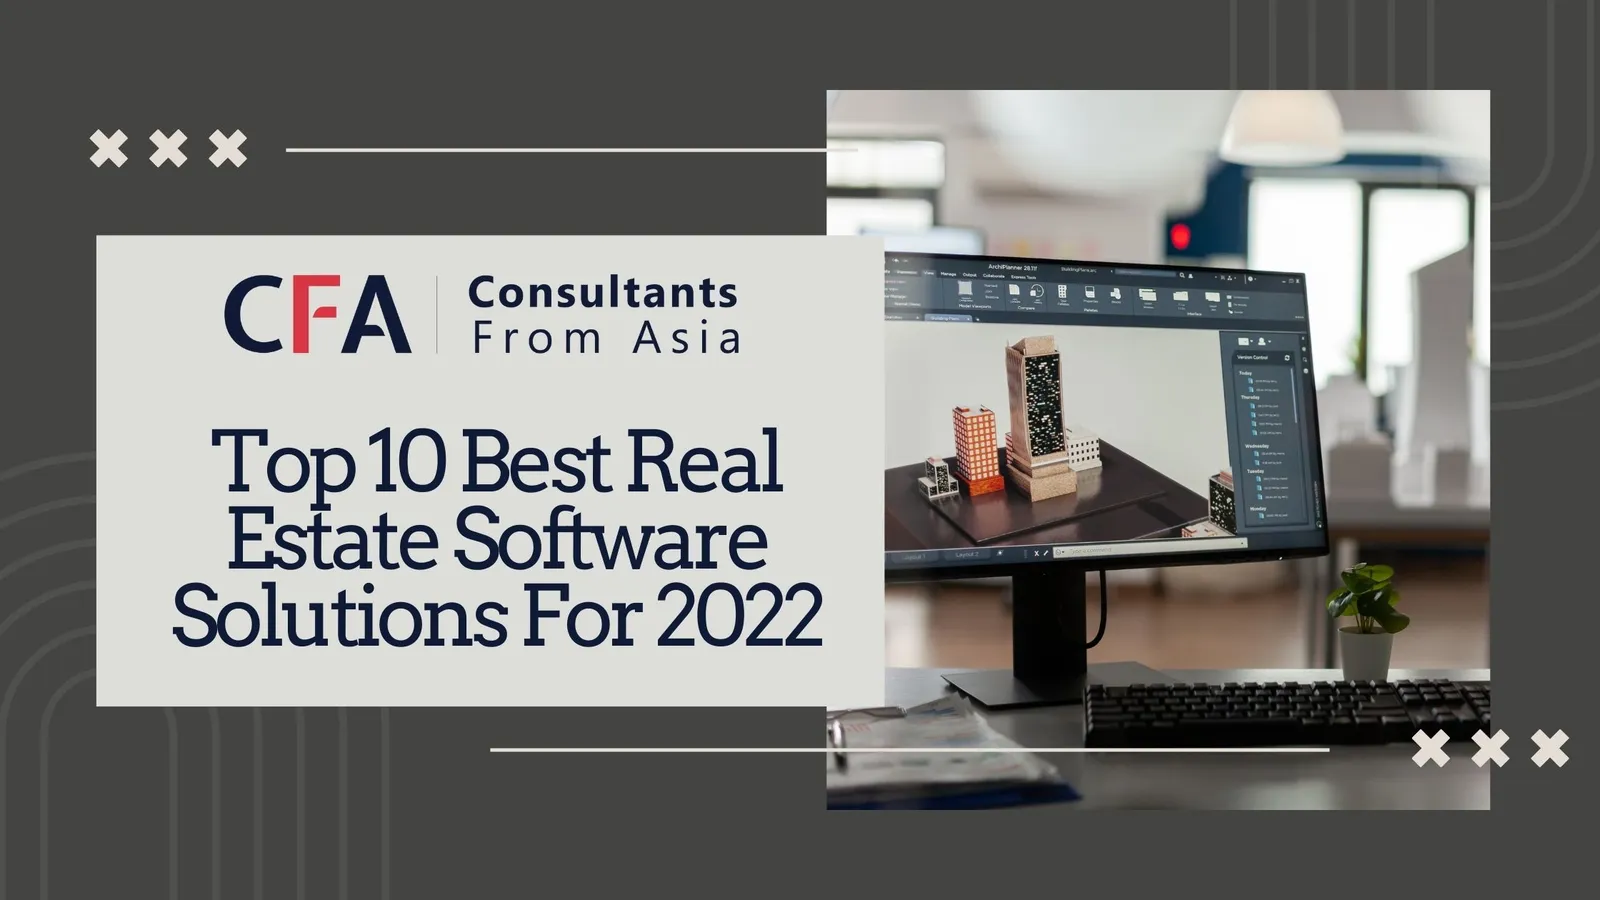 Top 10 Best Real Estate Software Solutions For 2022